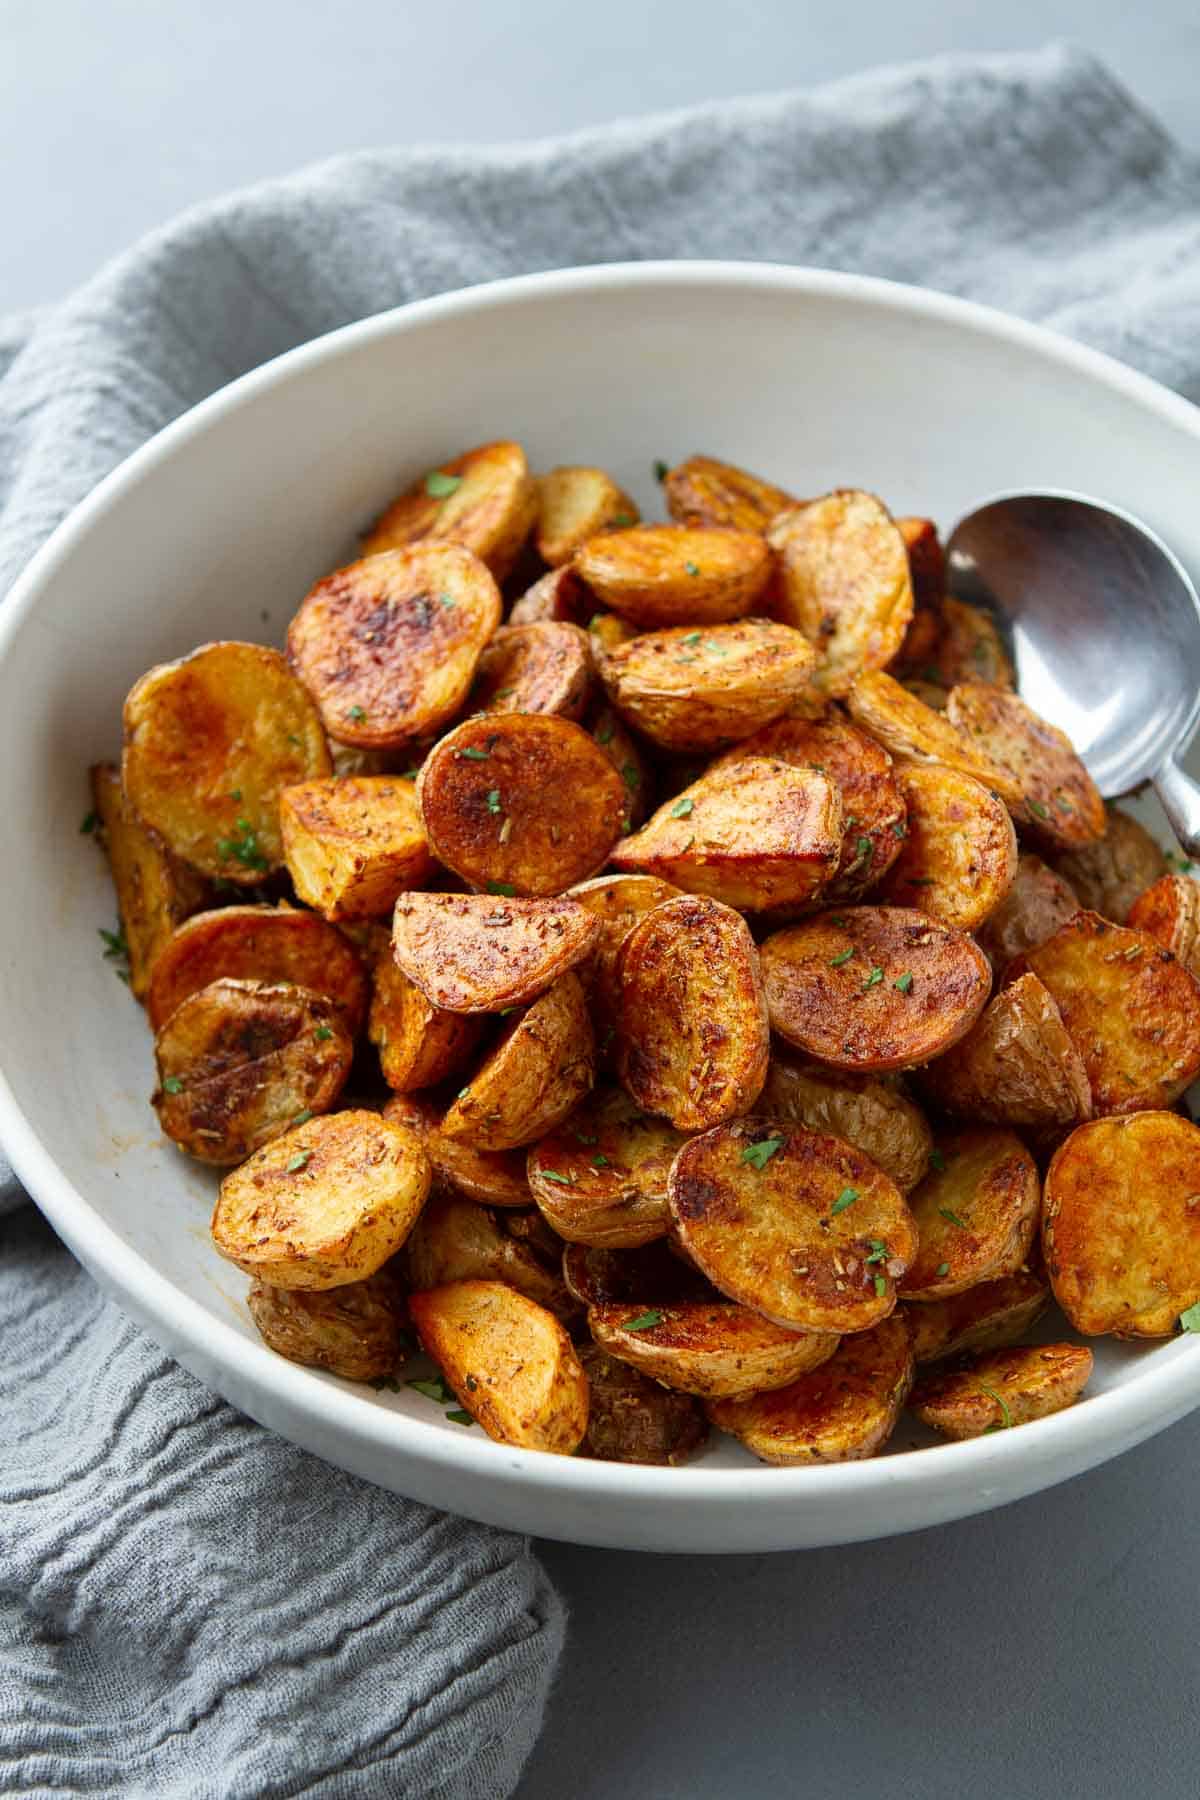 Roasted potatoes and a spoon in a white bowl.